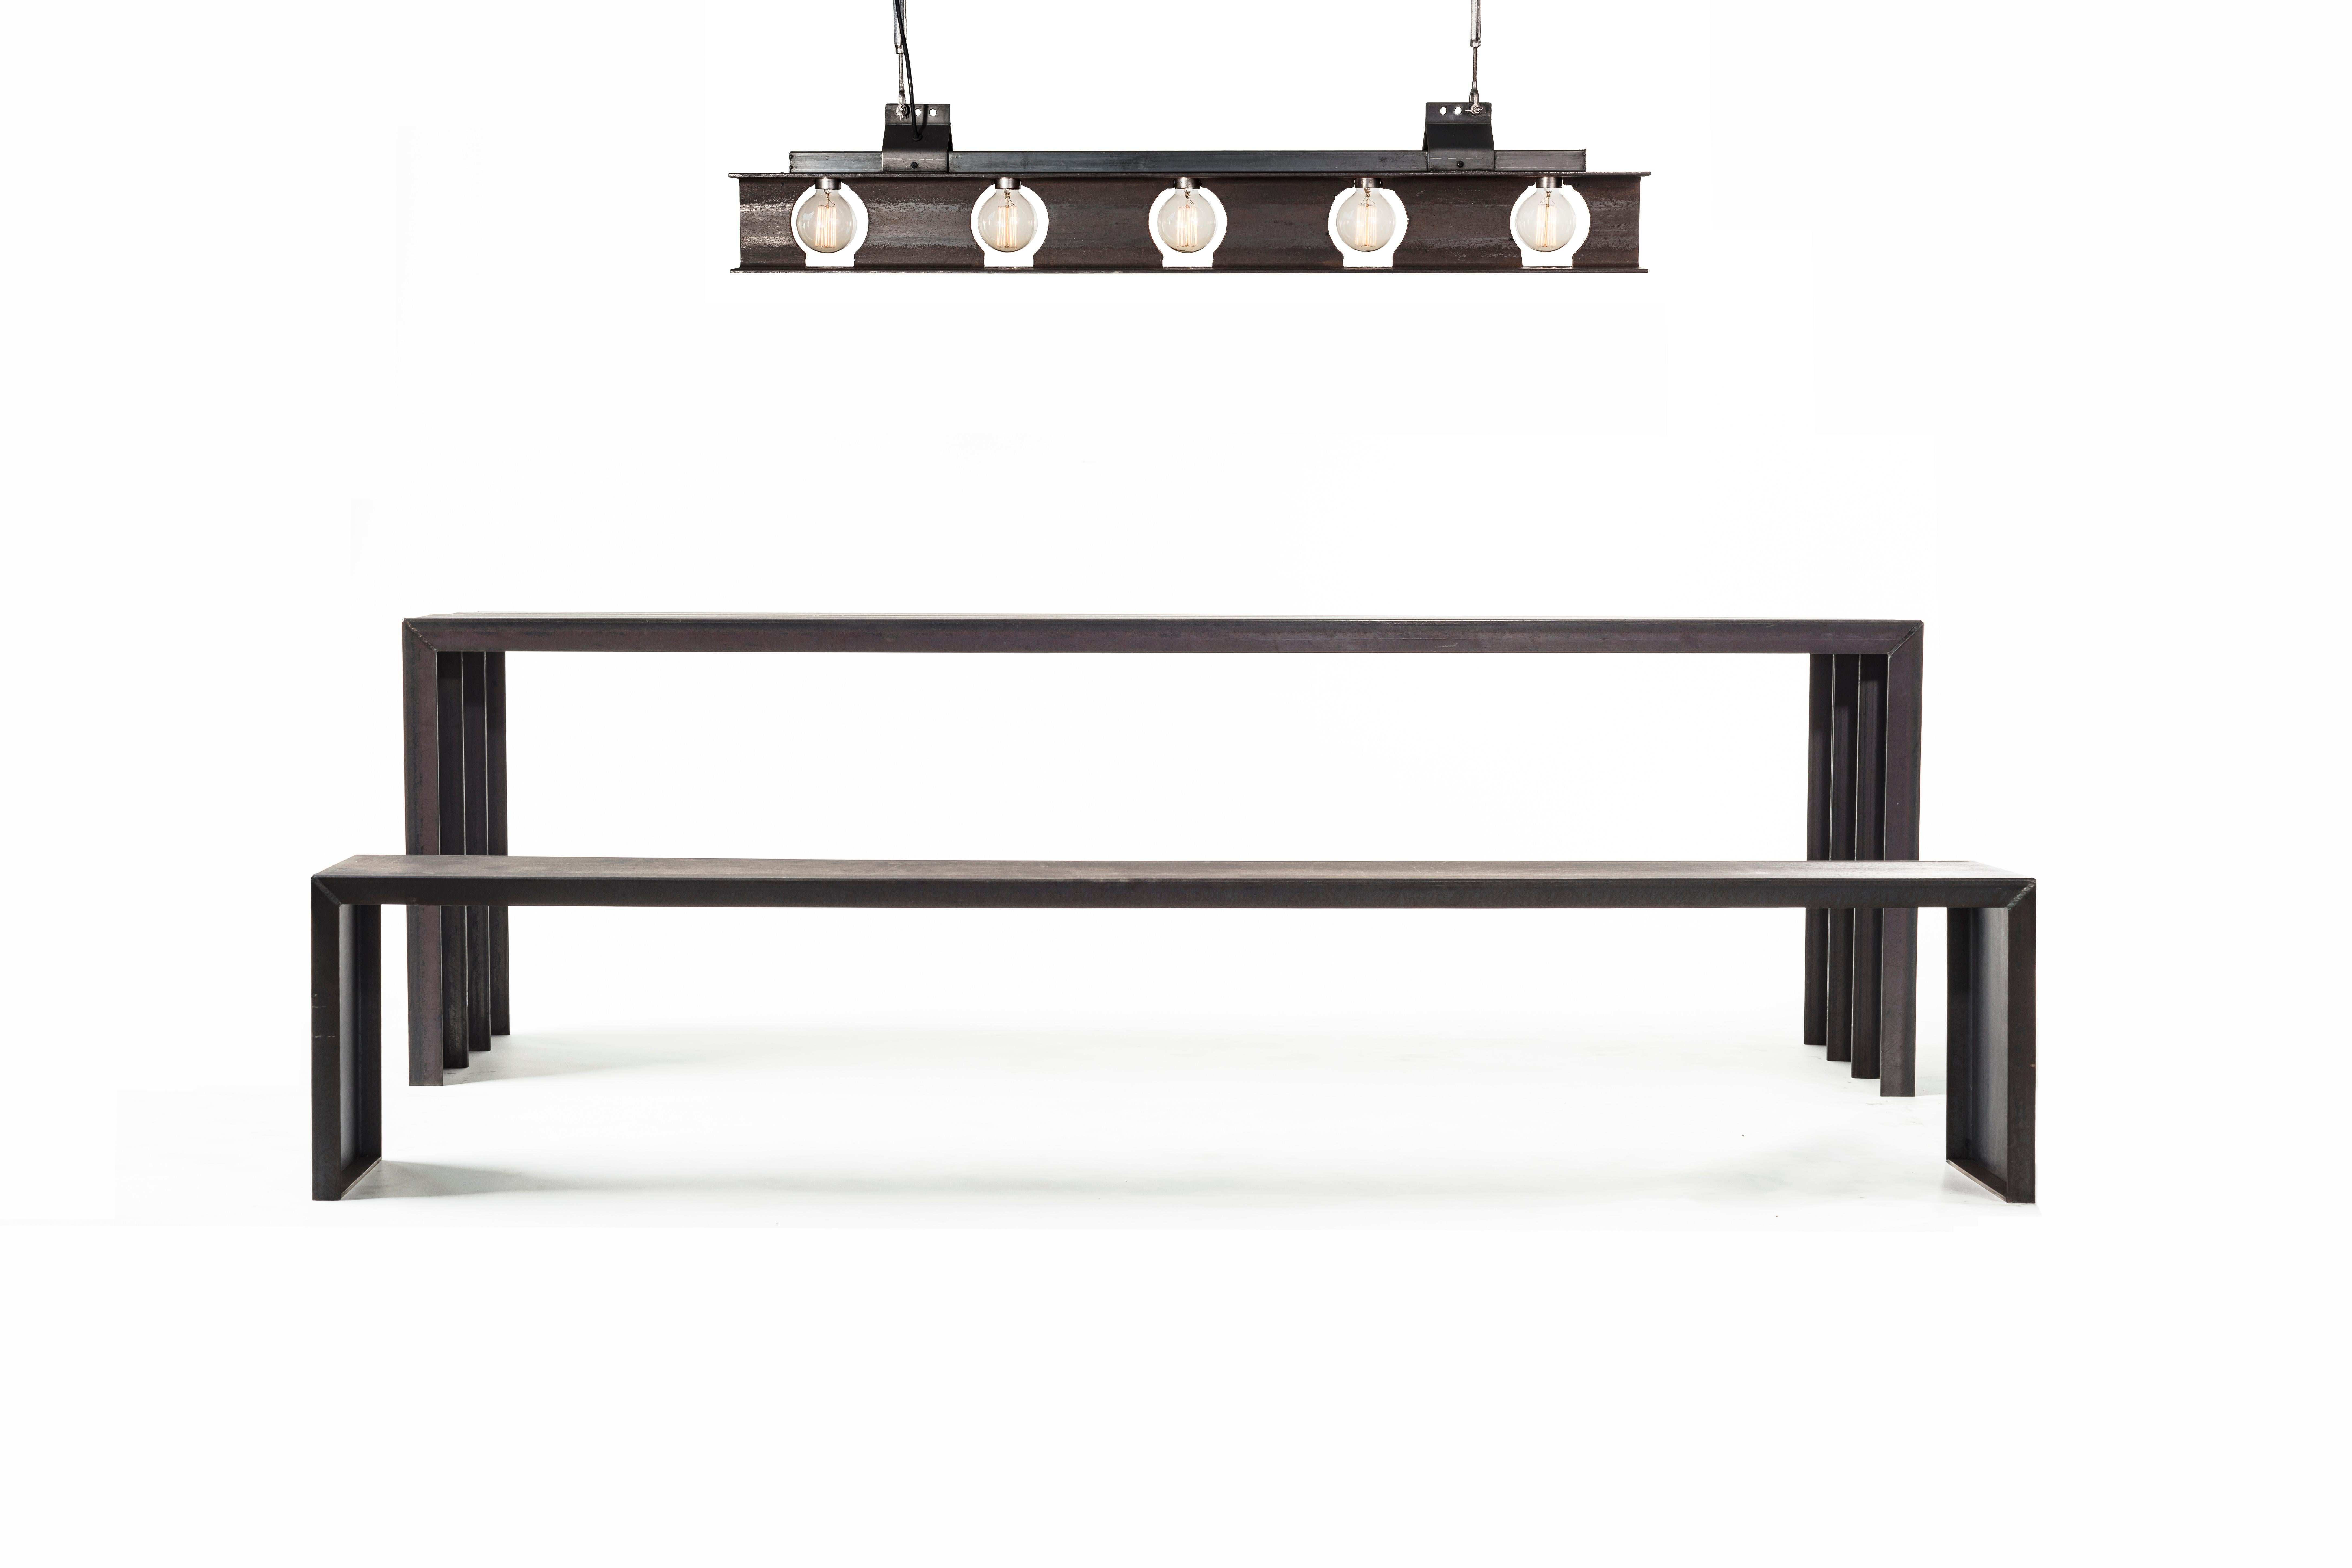 Blackened 'I-Beam Linear Pendant' by Basile Built - 2700K Soft White - Limited Edition  For Sale